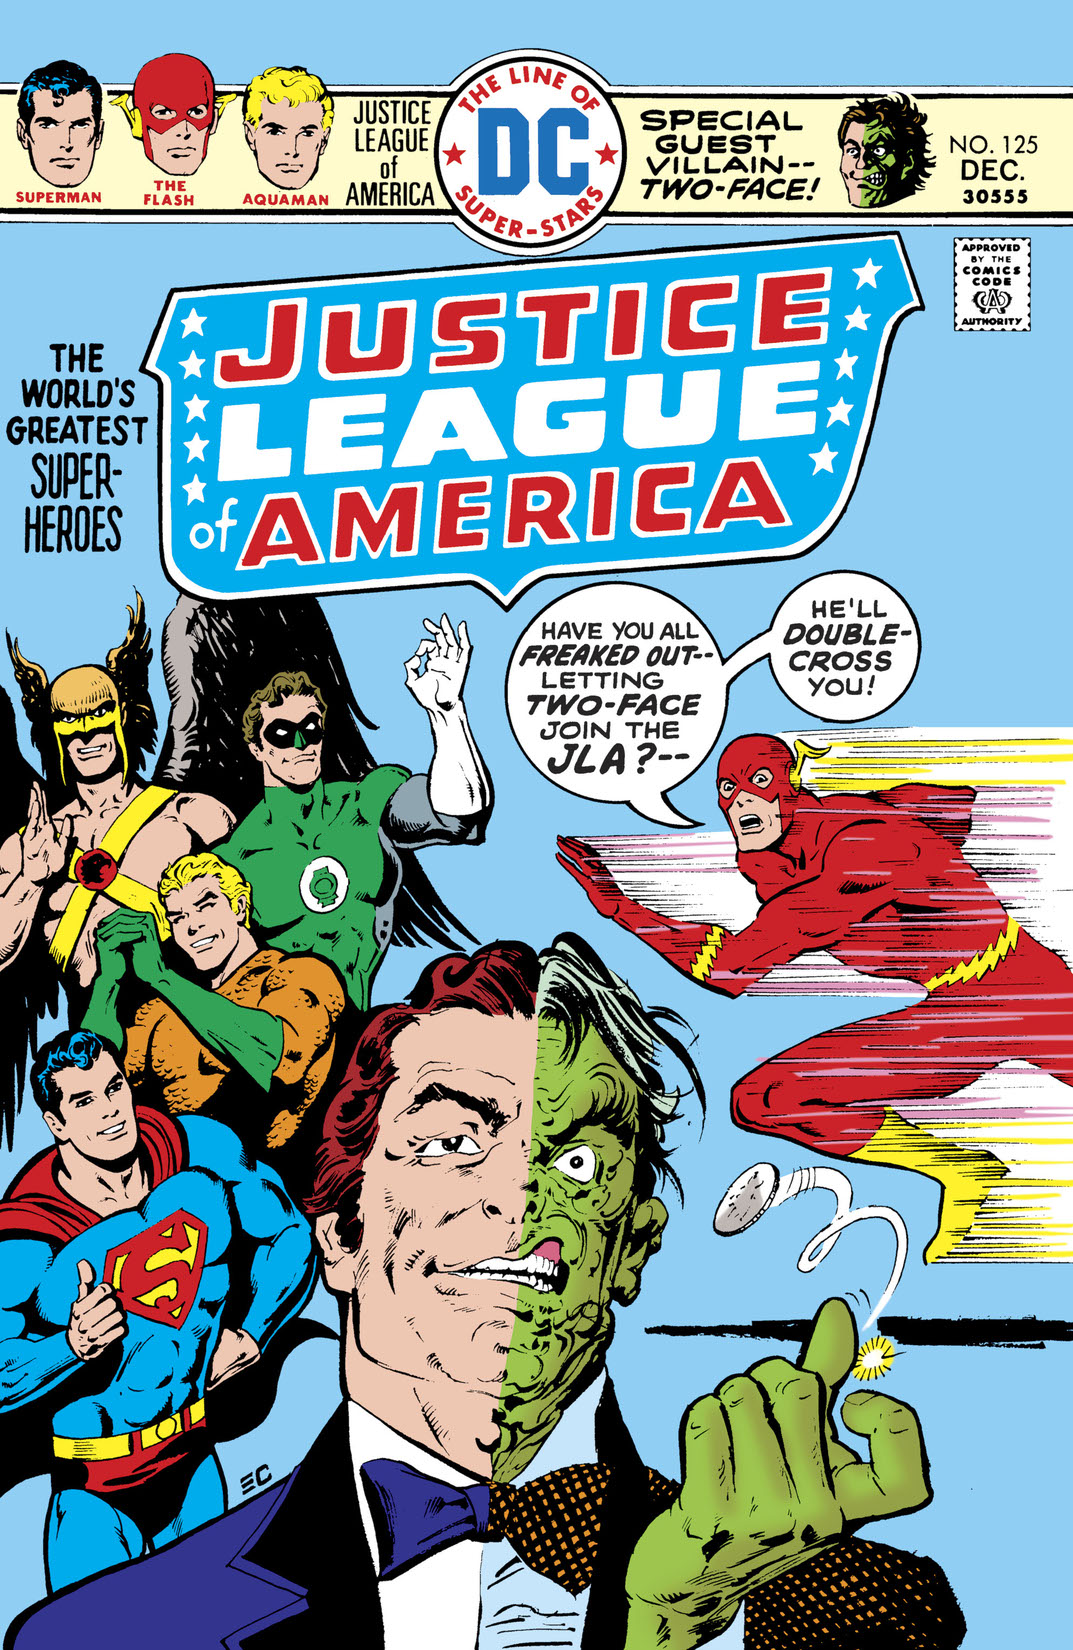 Justice League of America (1960-) #125 preview images